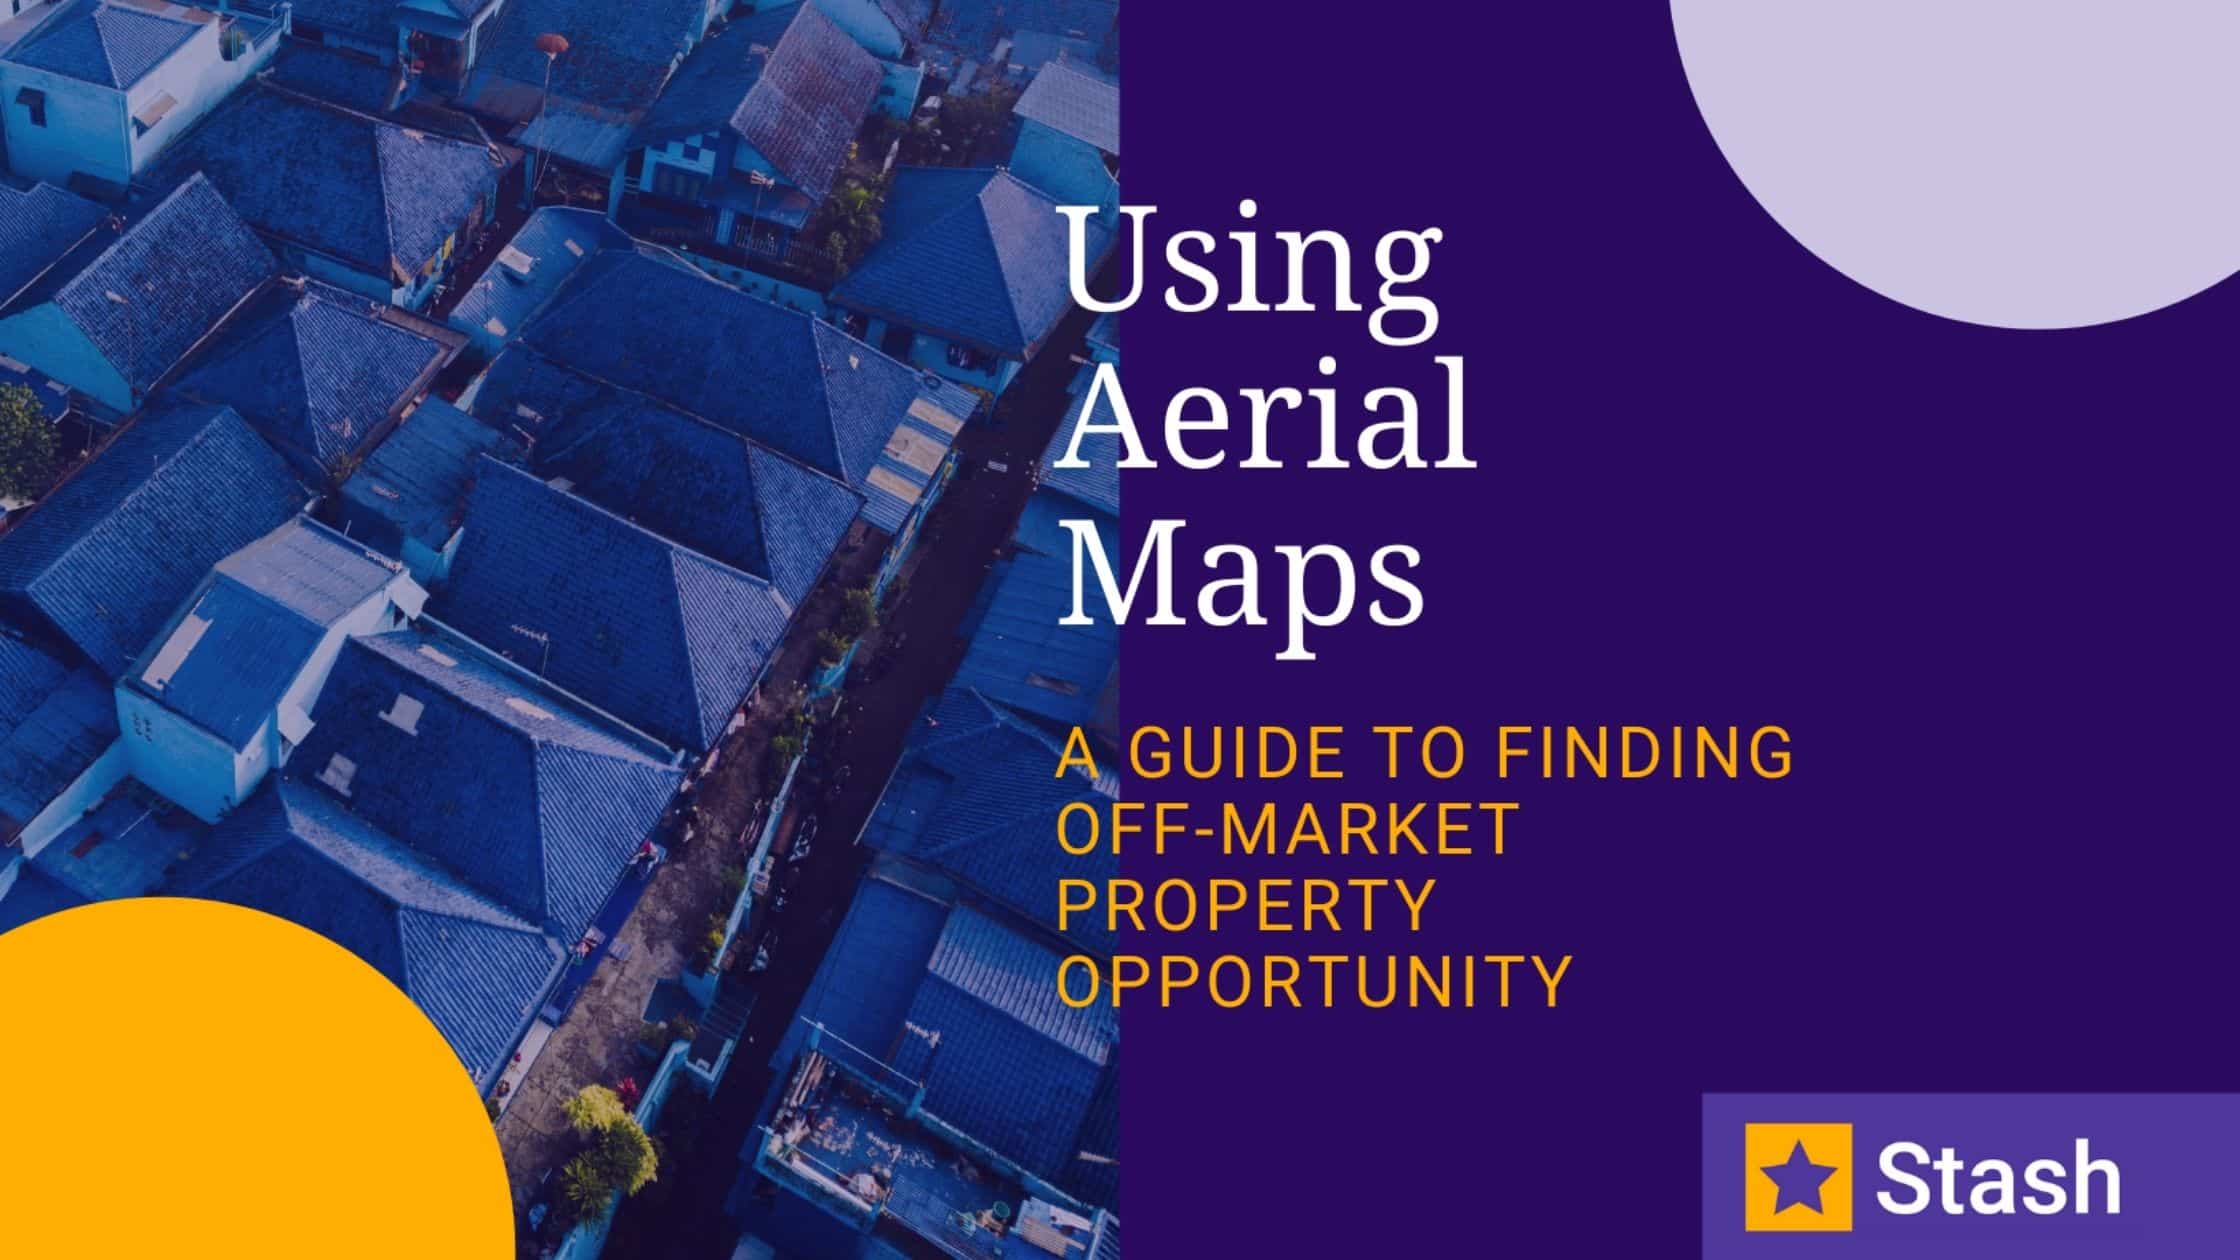 Using Aerial Maps: A guide to finding off-market property opportunities.